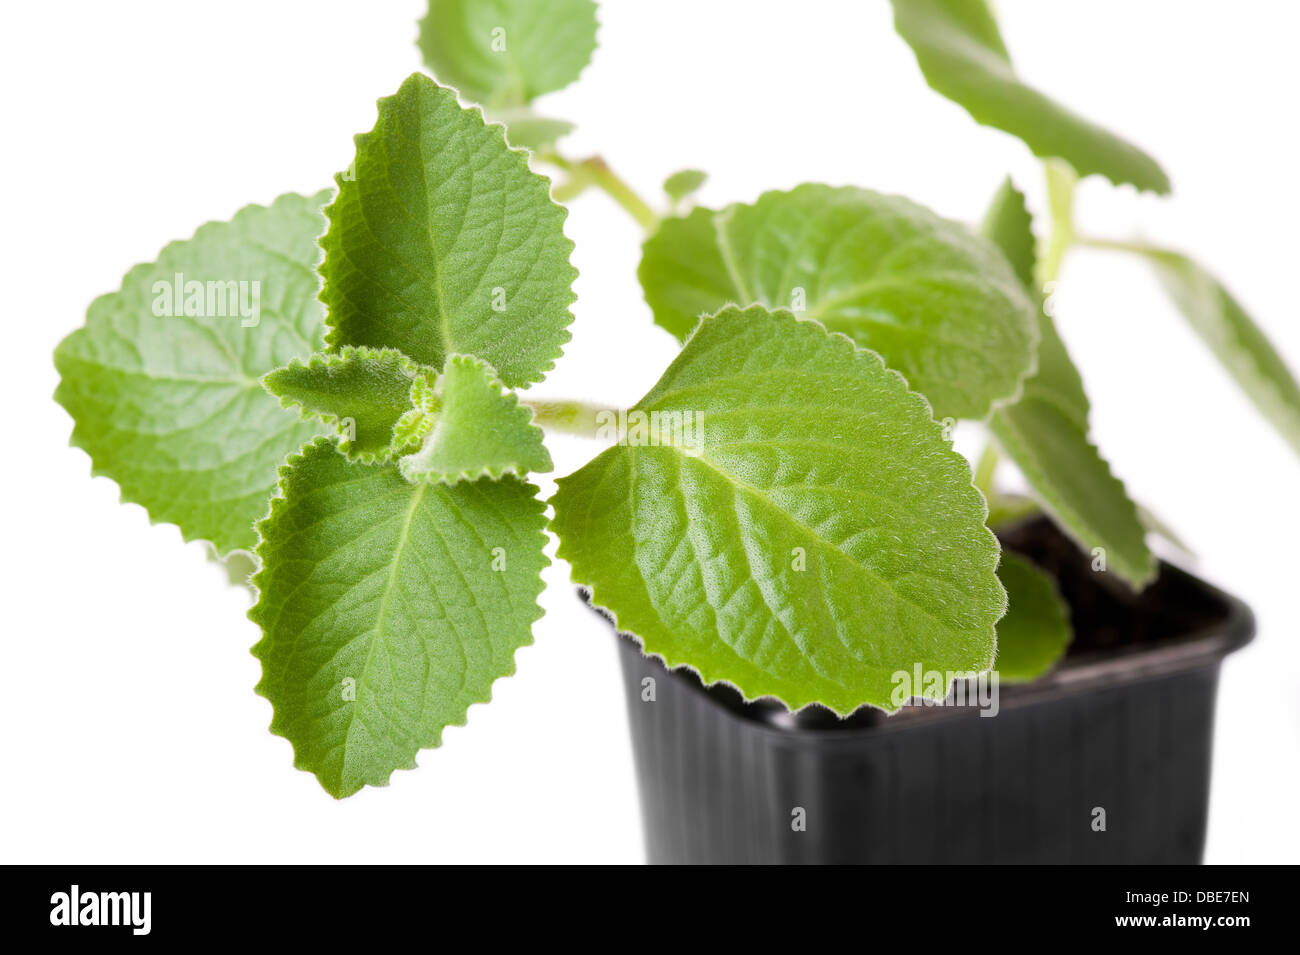 leaves of Plectranthus amboinicus Stock Photo